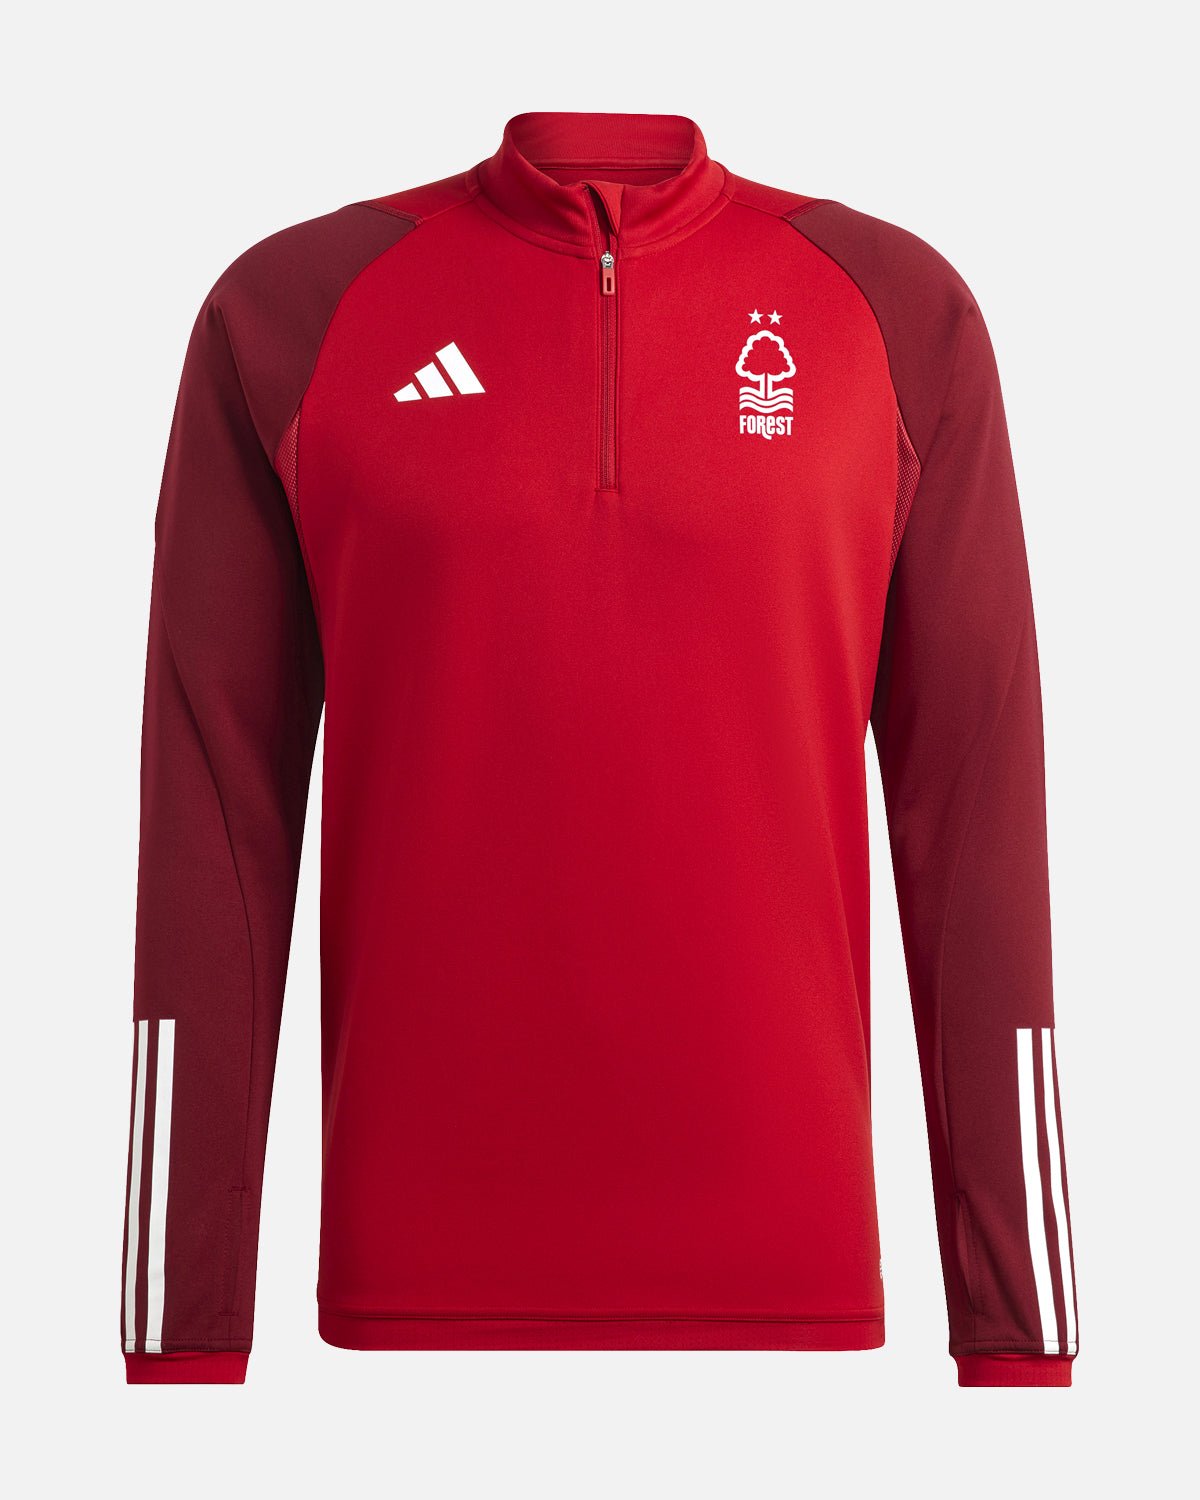 NFFC Junior Red Training Top 23-24 - Nottingham Forest FC